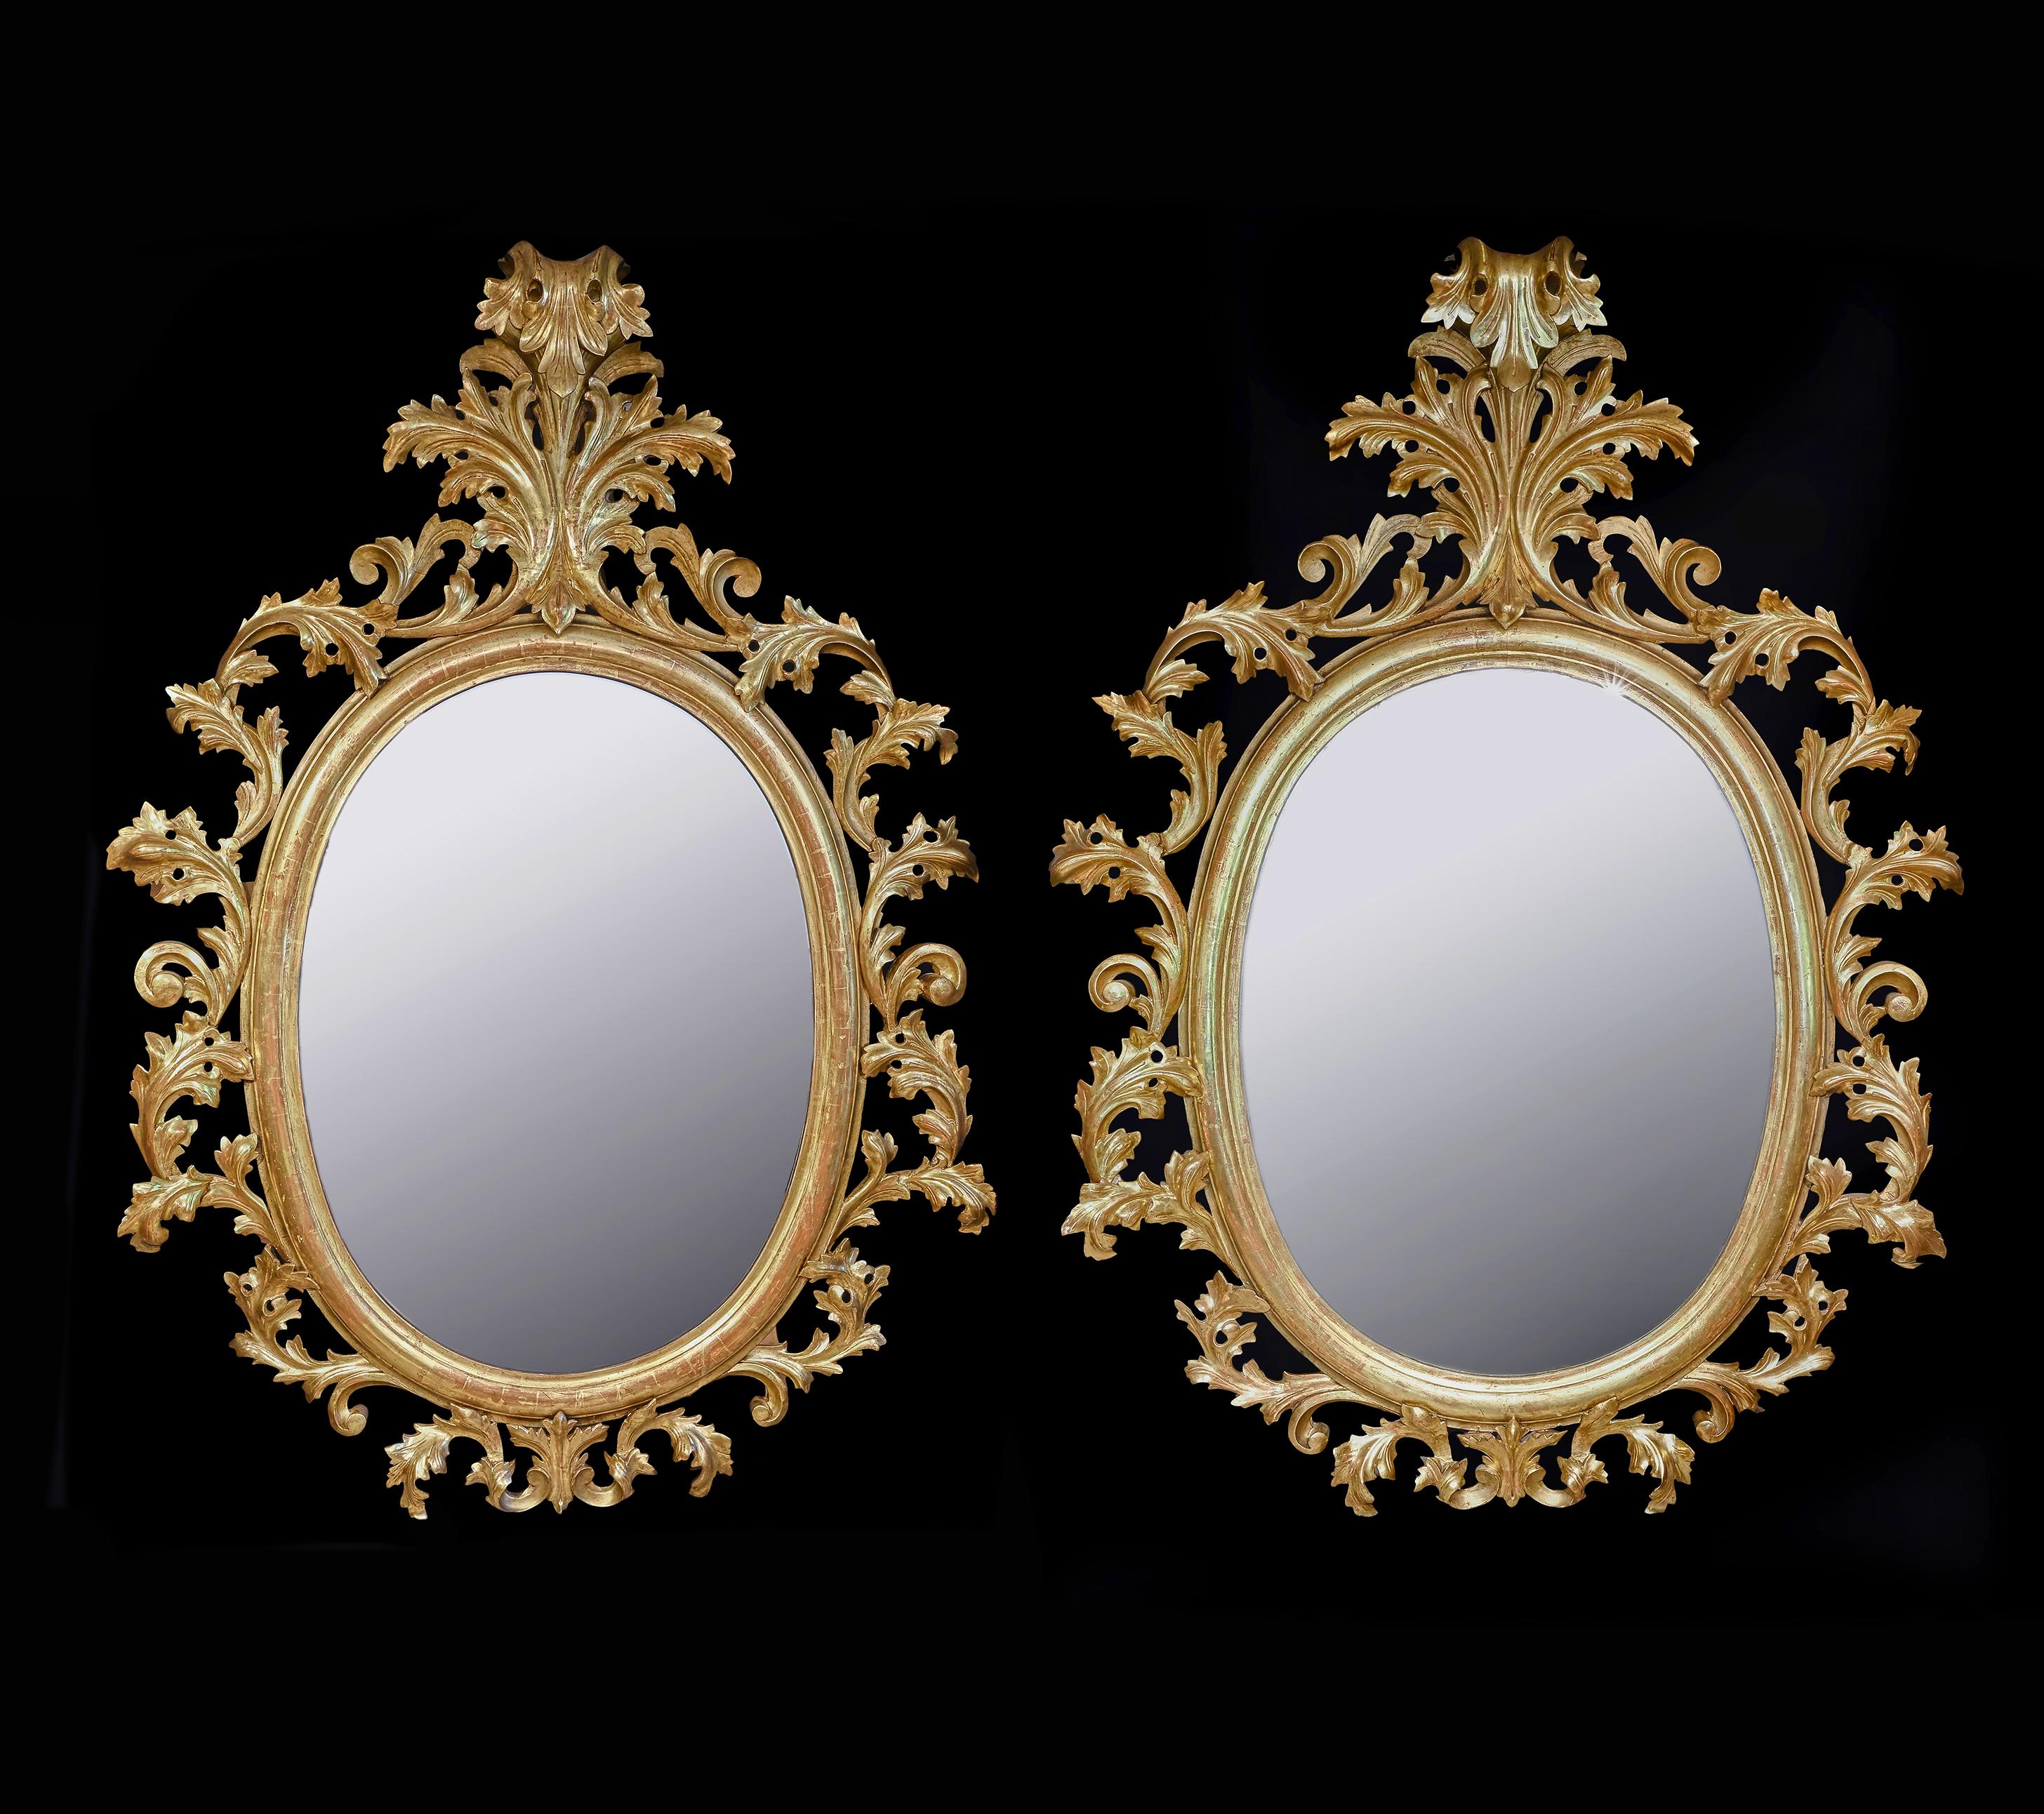 Monumental Pair of 19th Century Oval Florentine Carved Giltwood Mirrors 4